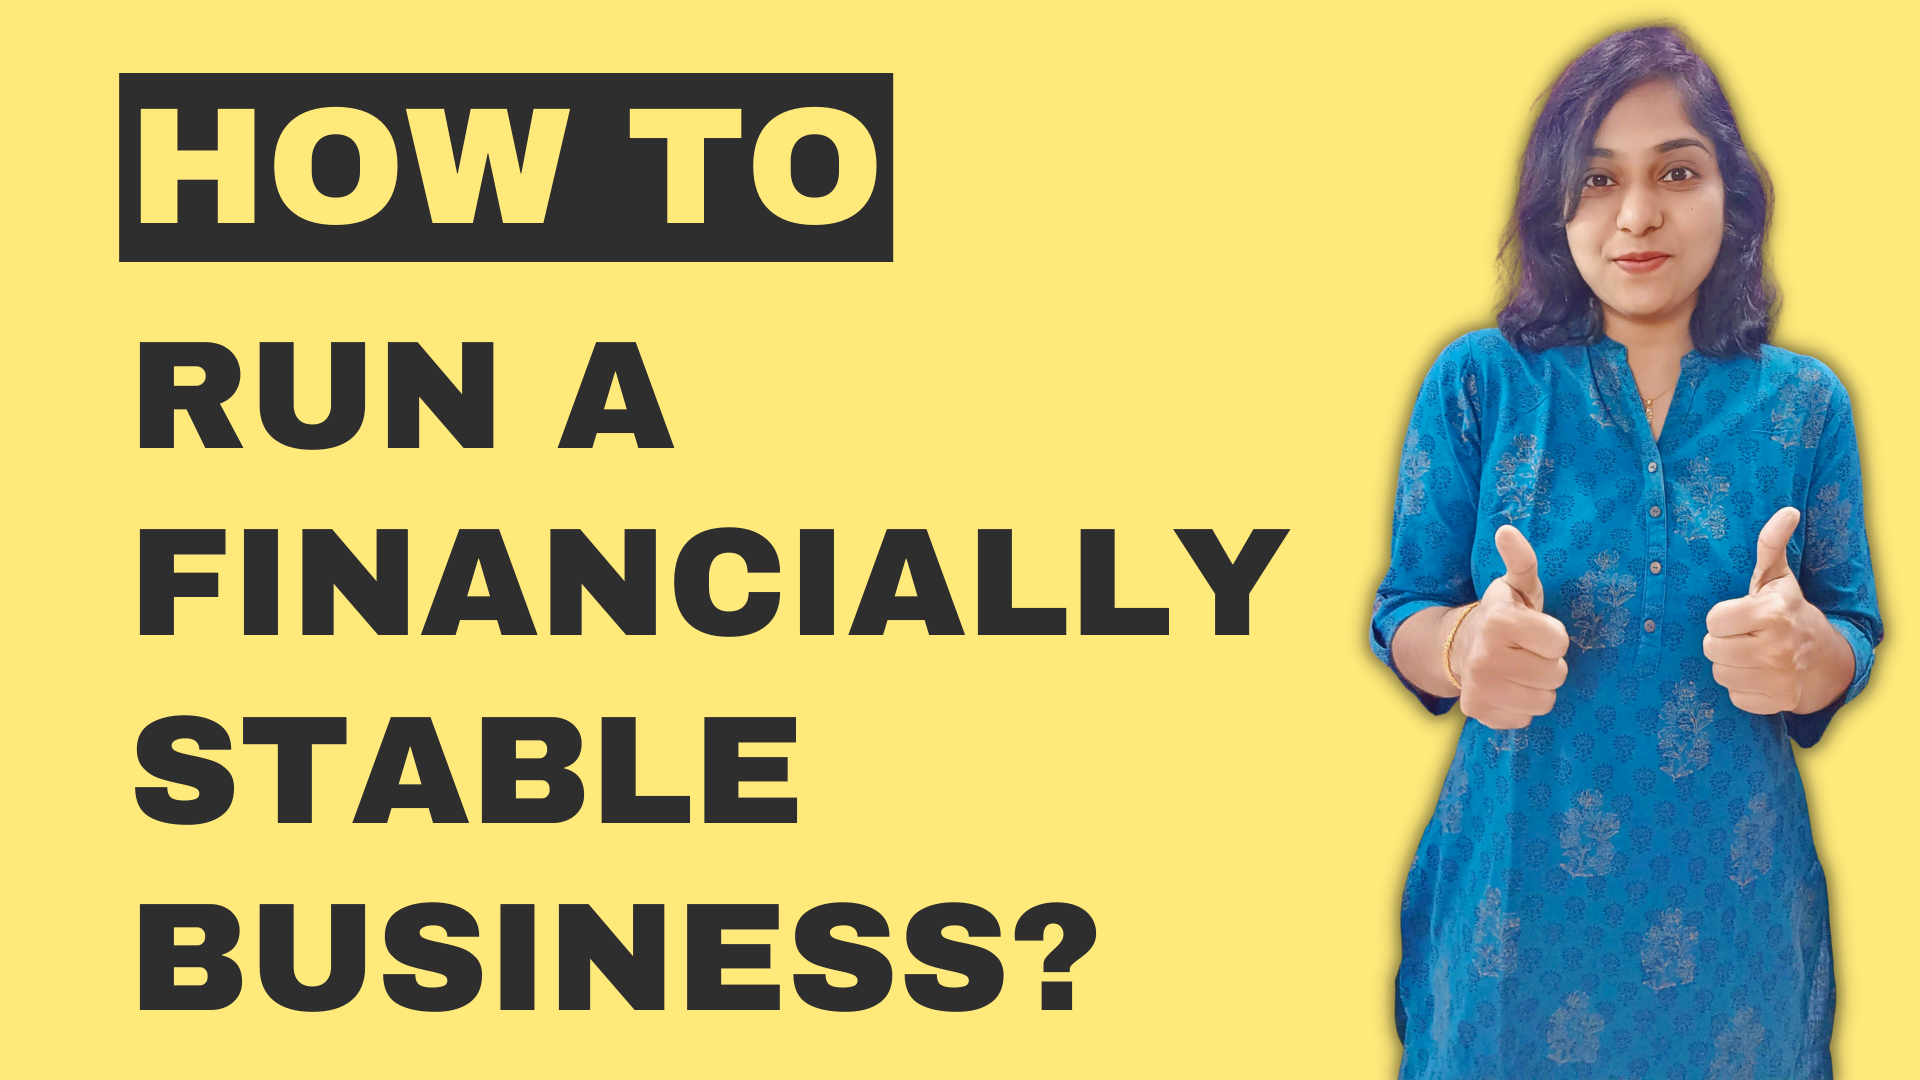 How To Run A Financially Stable Business?